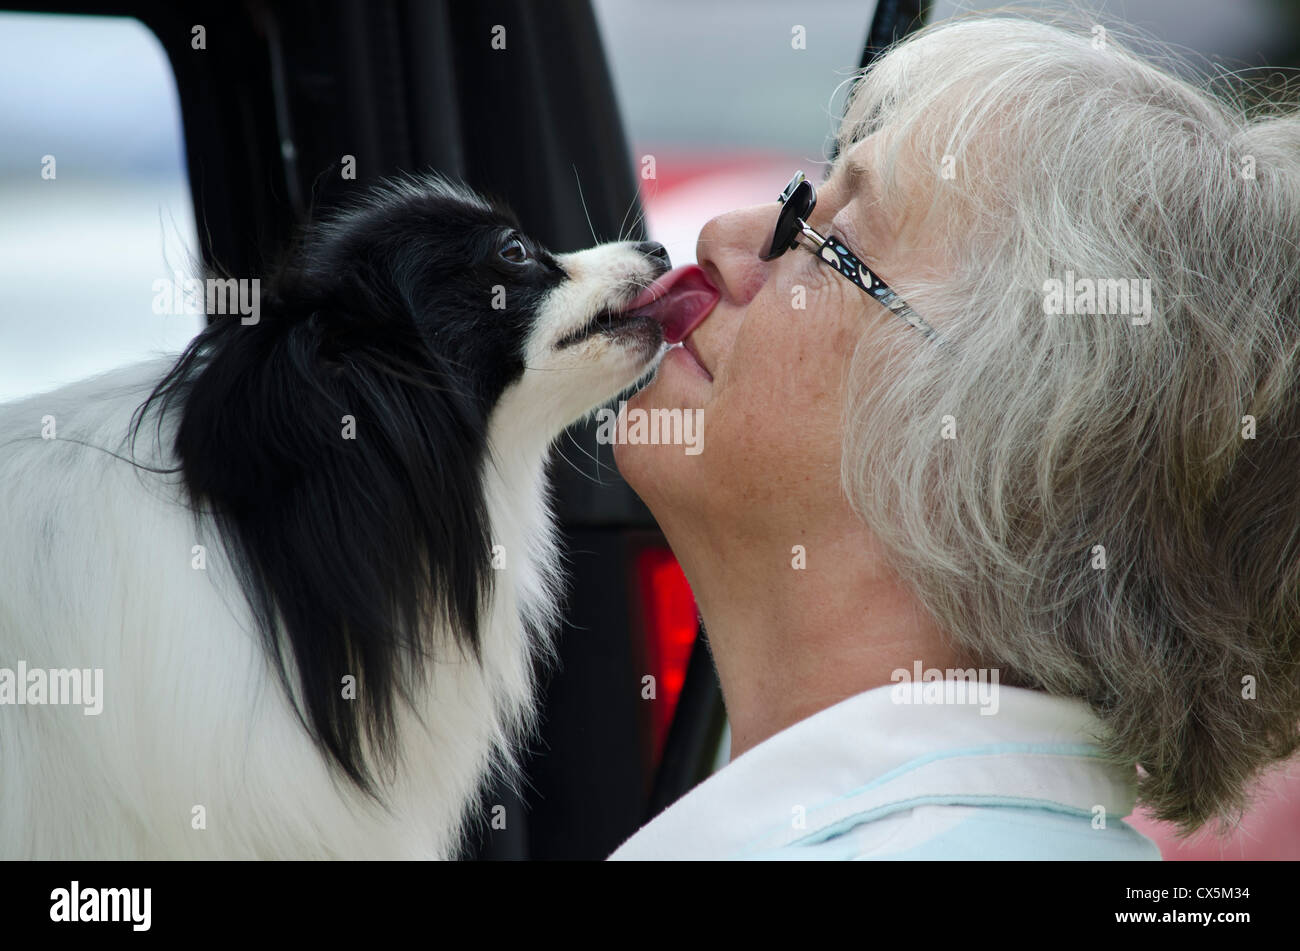 Dog licking his owner at a dogs show Essex UK Stock Photo